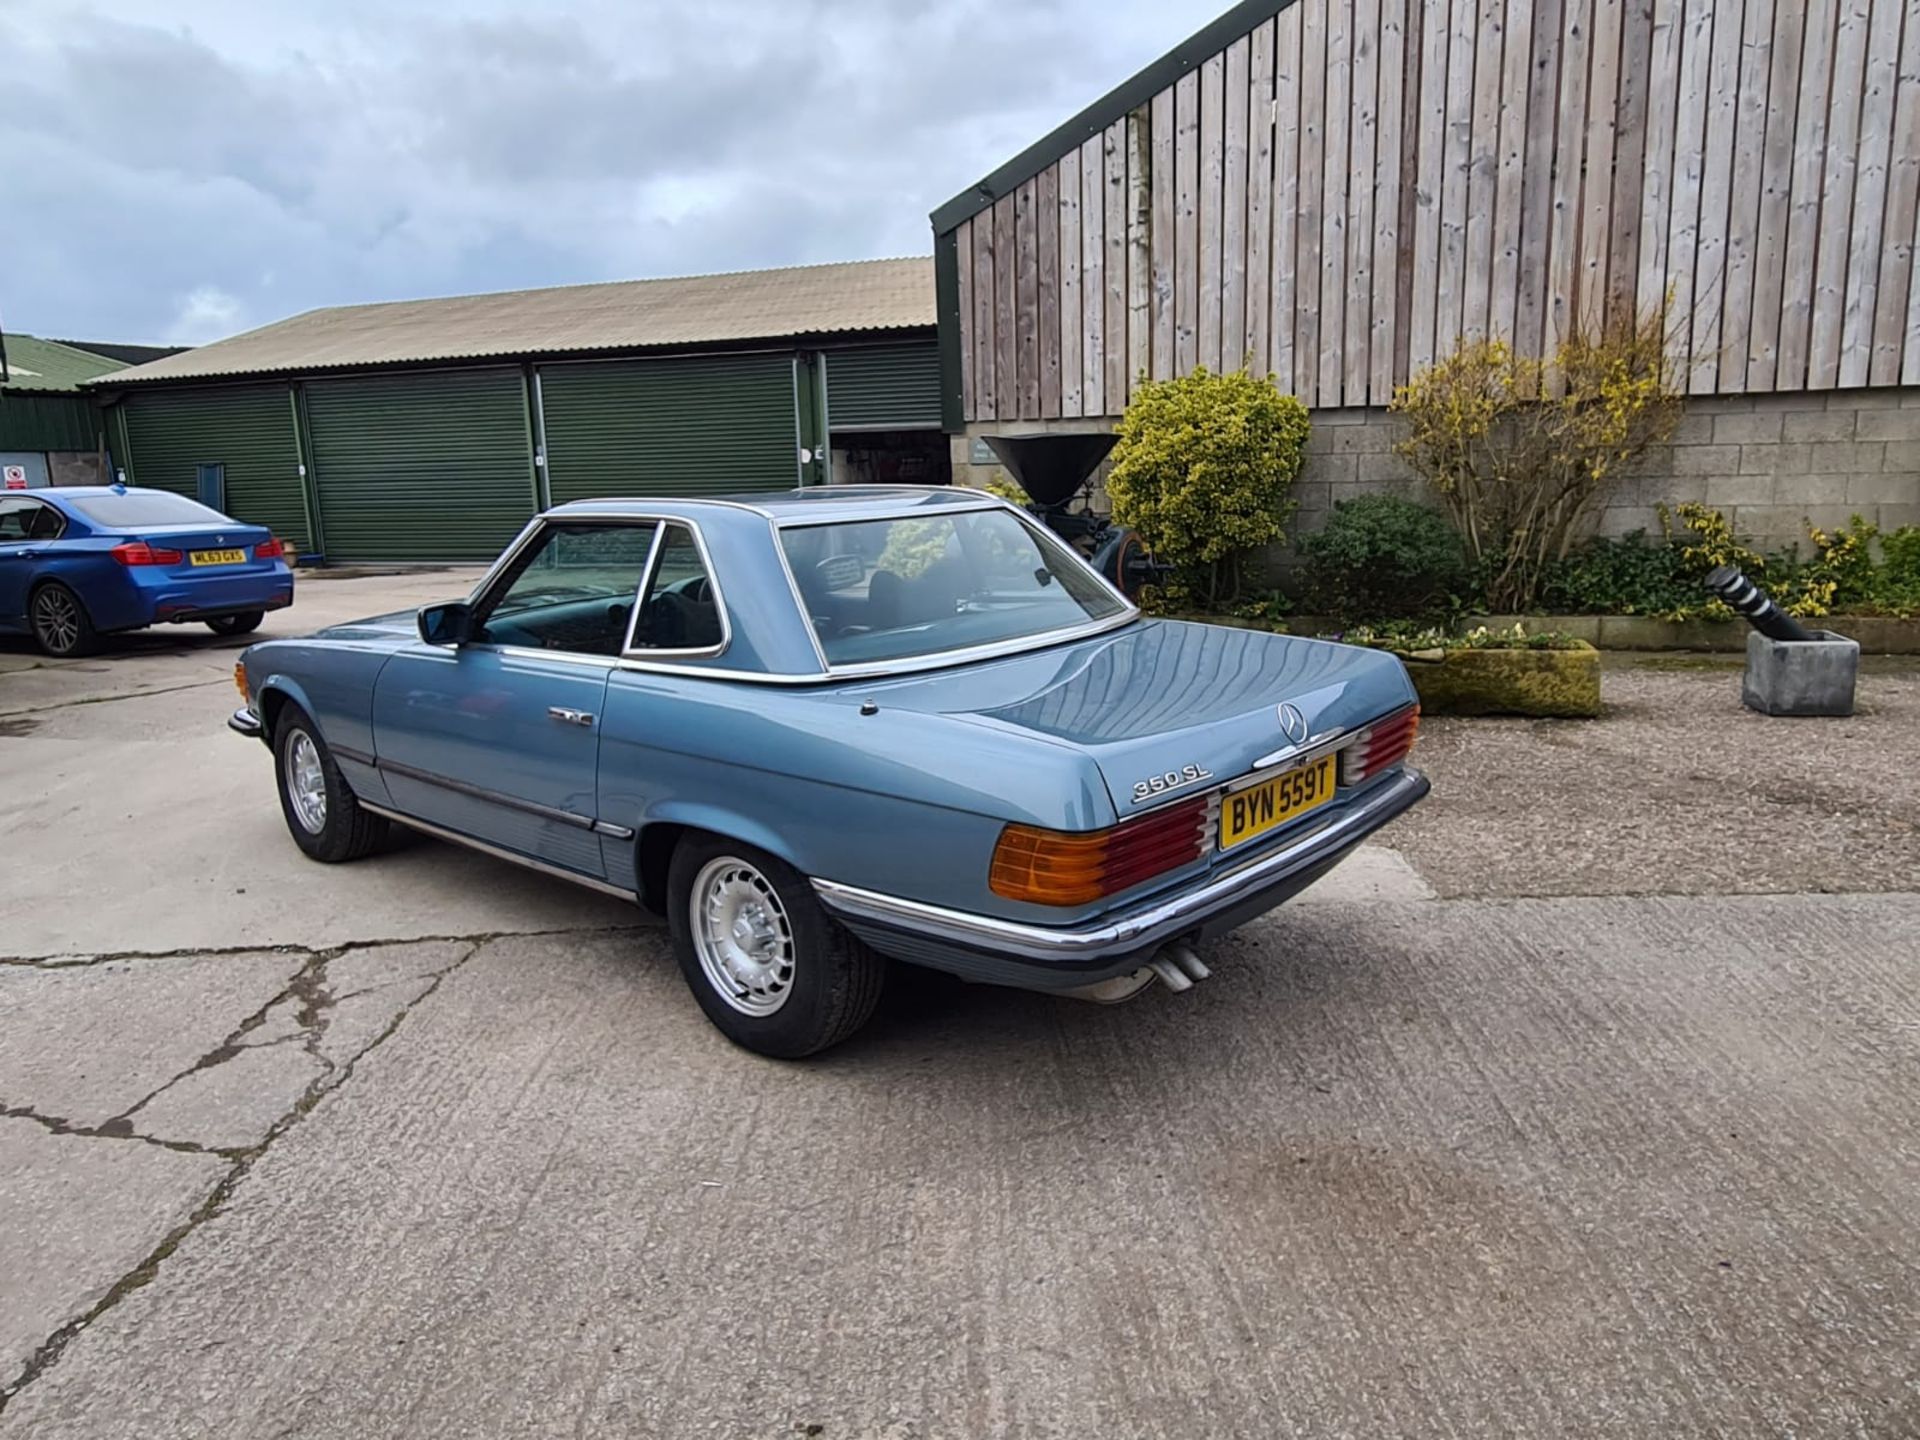 Stunning 1979 Mercedes Benz SL350 V8 With Factory Hardtop - Restored in 2018 - Image 22 of 22